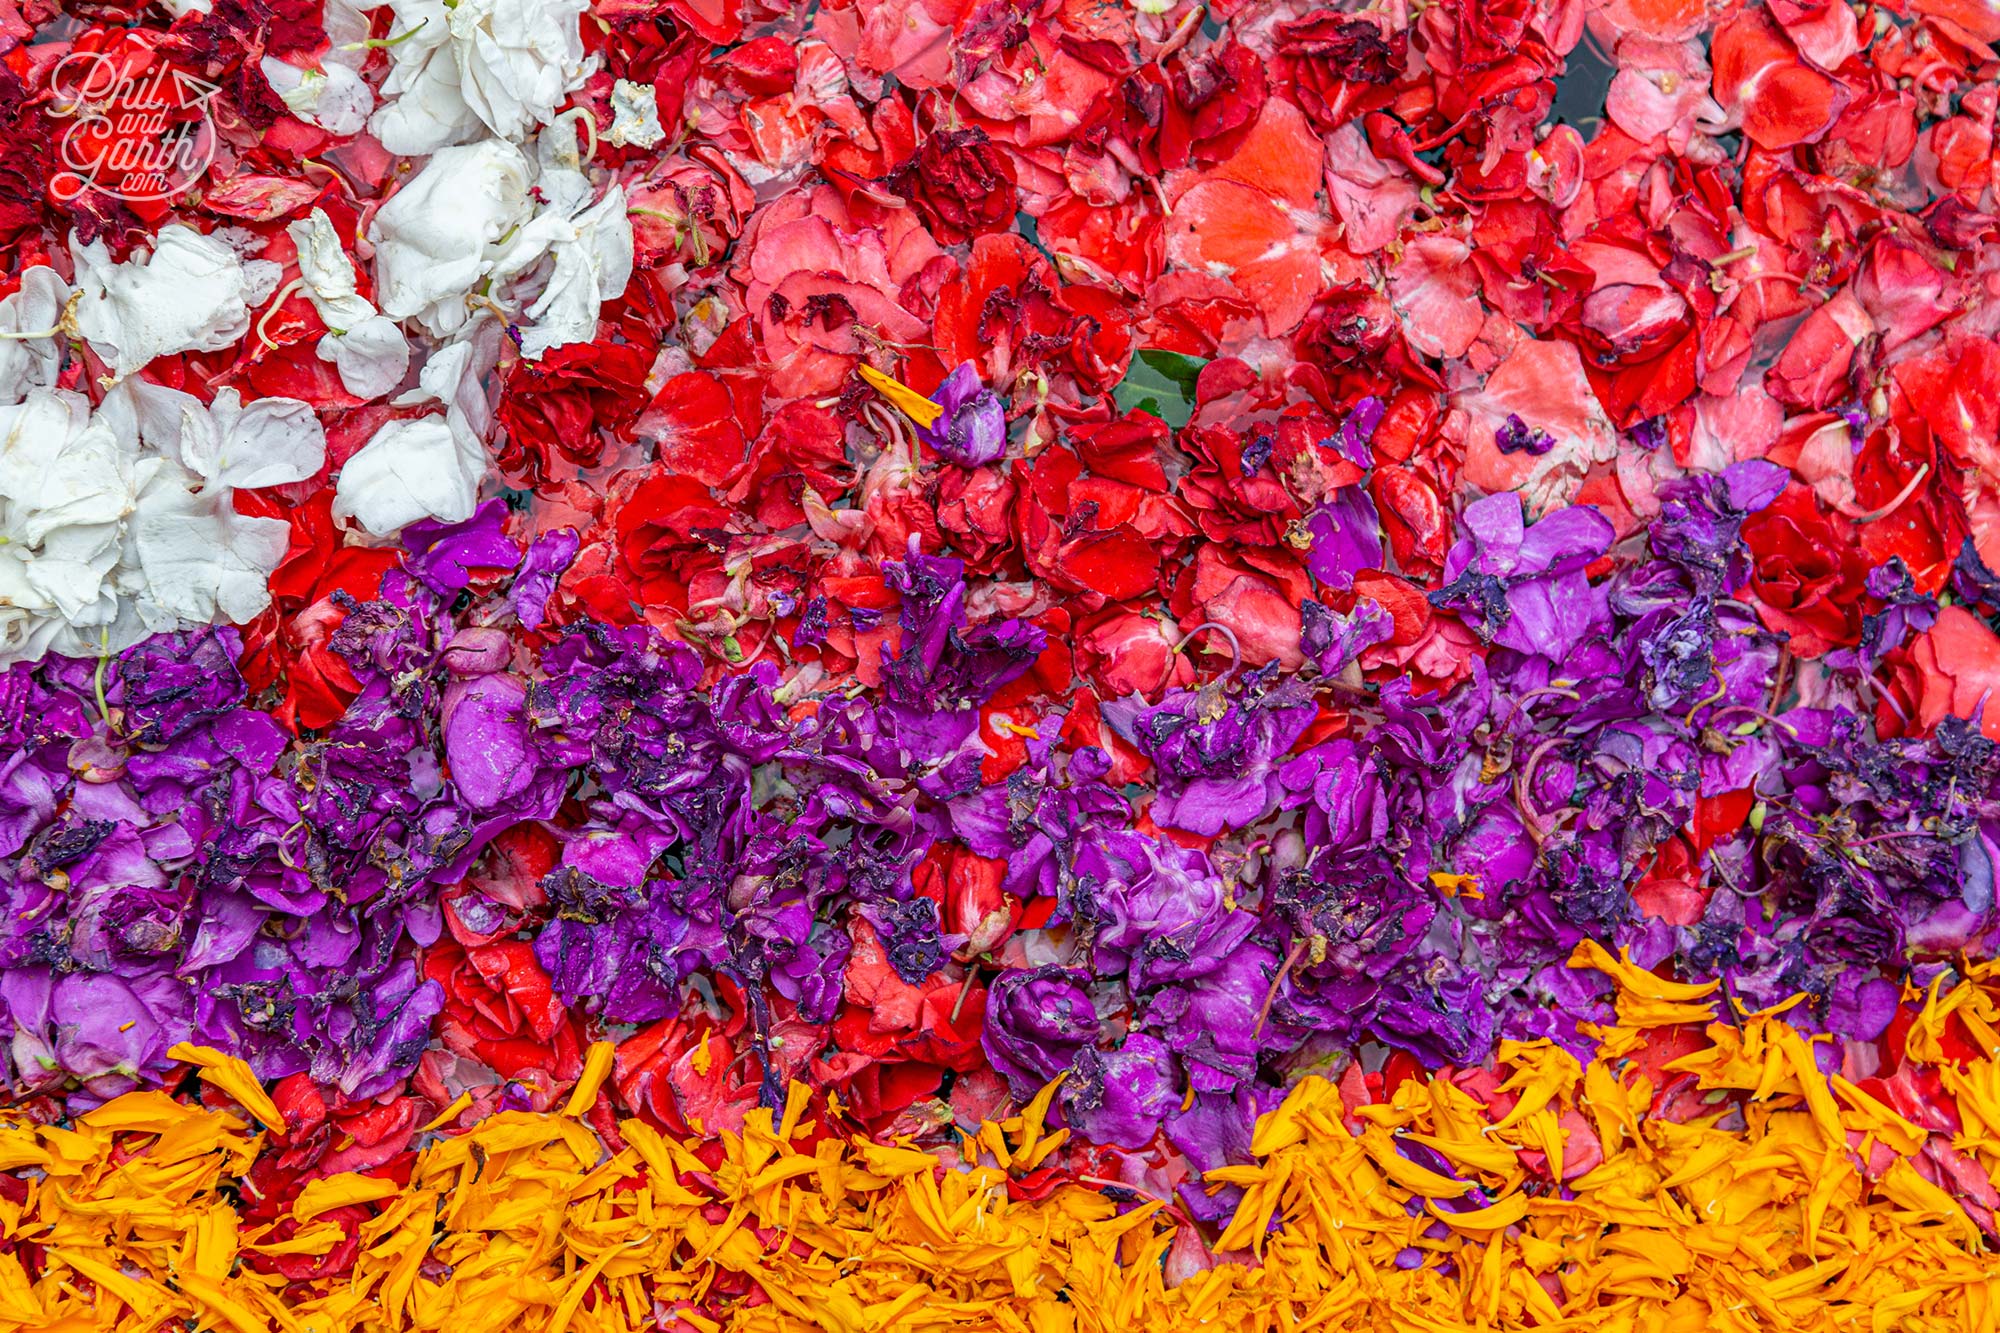 Take close up photographs of the flower petals